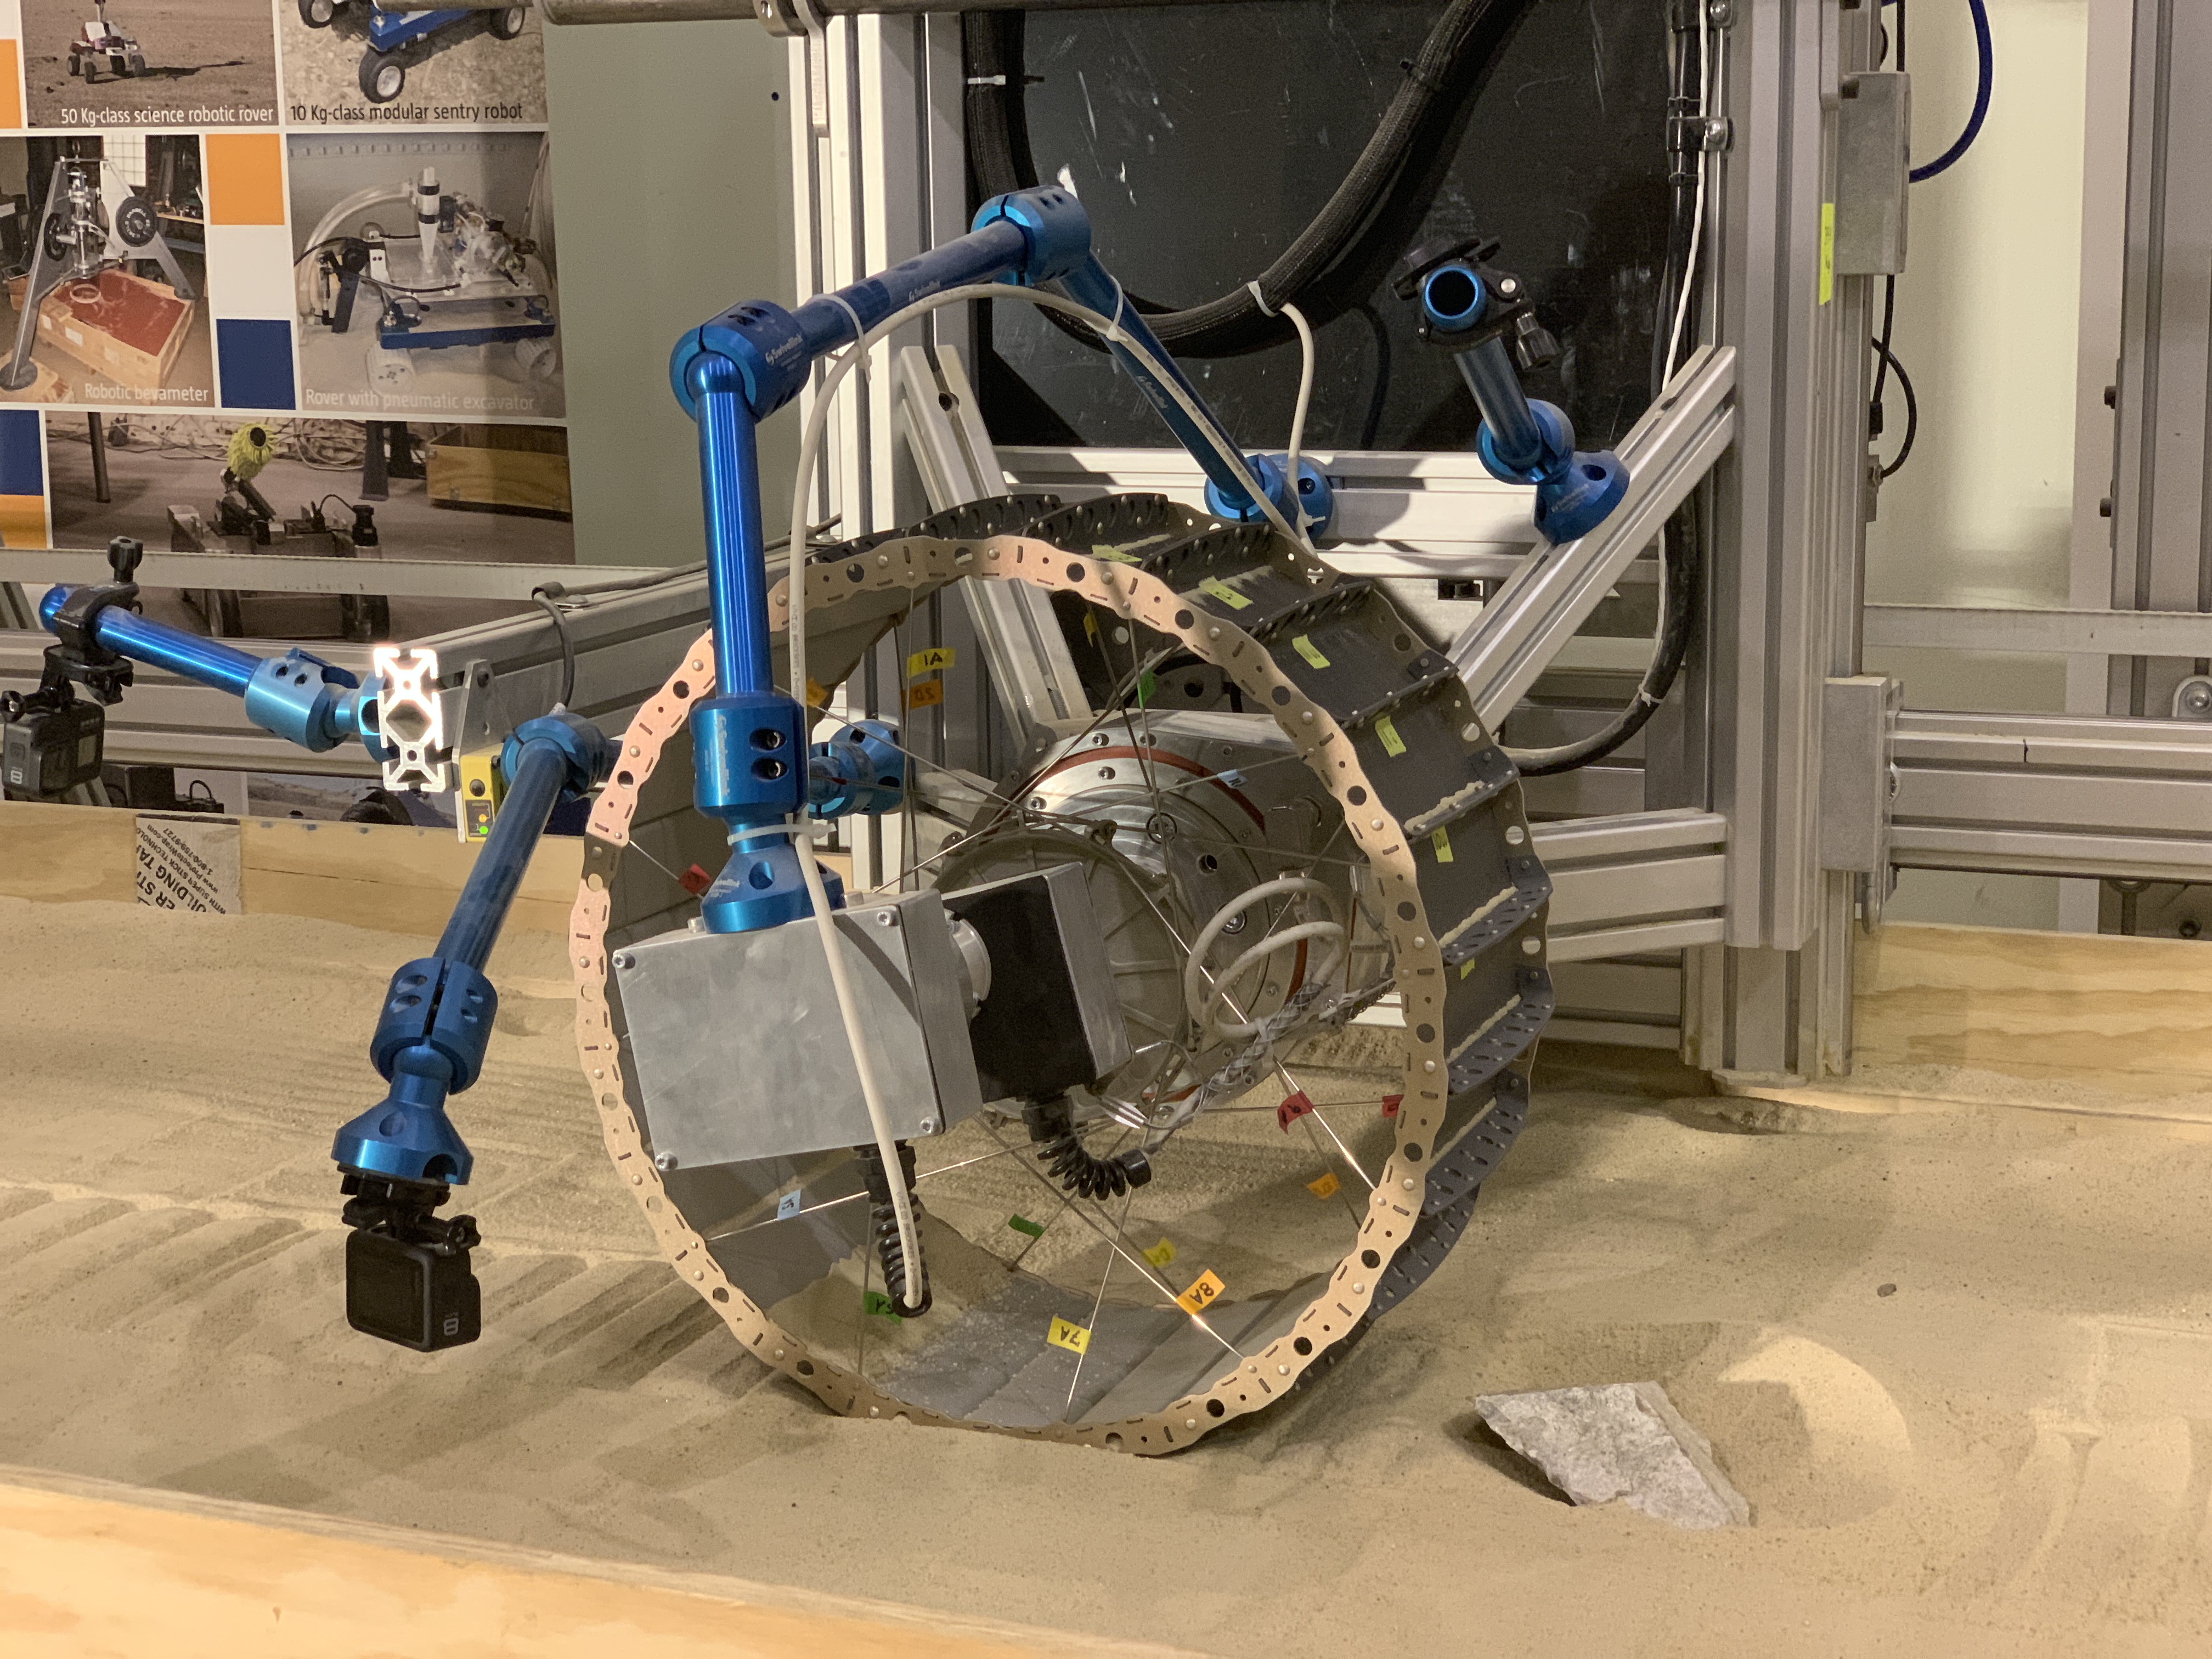 A wheel from NASA’s Volatiles Investigating Polar Exploration Rover, or VIPER, is run through endurance testing in a test bed containing lunar soil simulant and some of the most moon-like rocks on Earth, at ProtoInnovations in Pittsburgh.